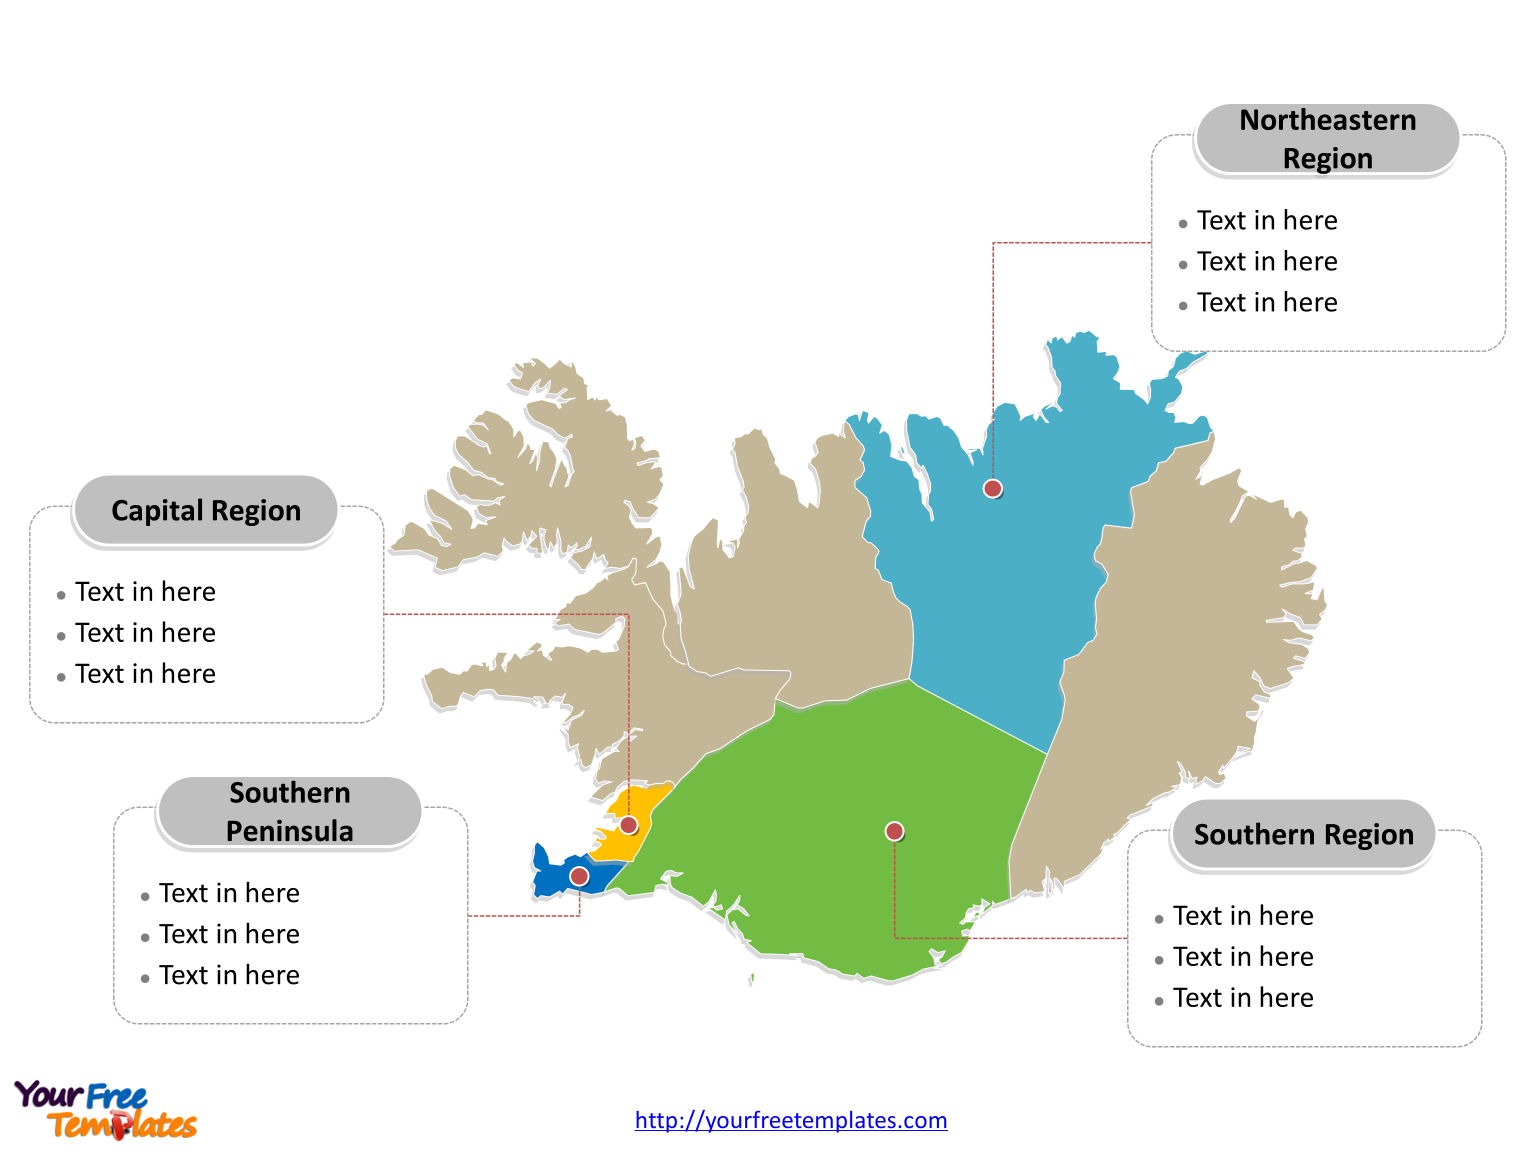 Iceland map labeled with major political regions